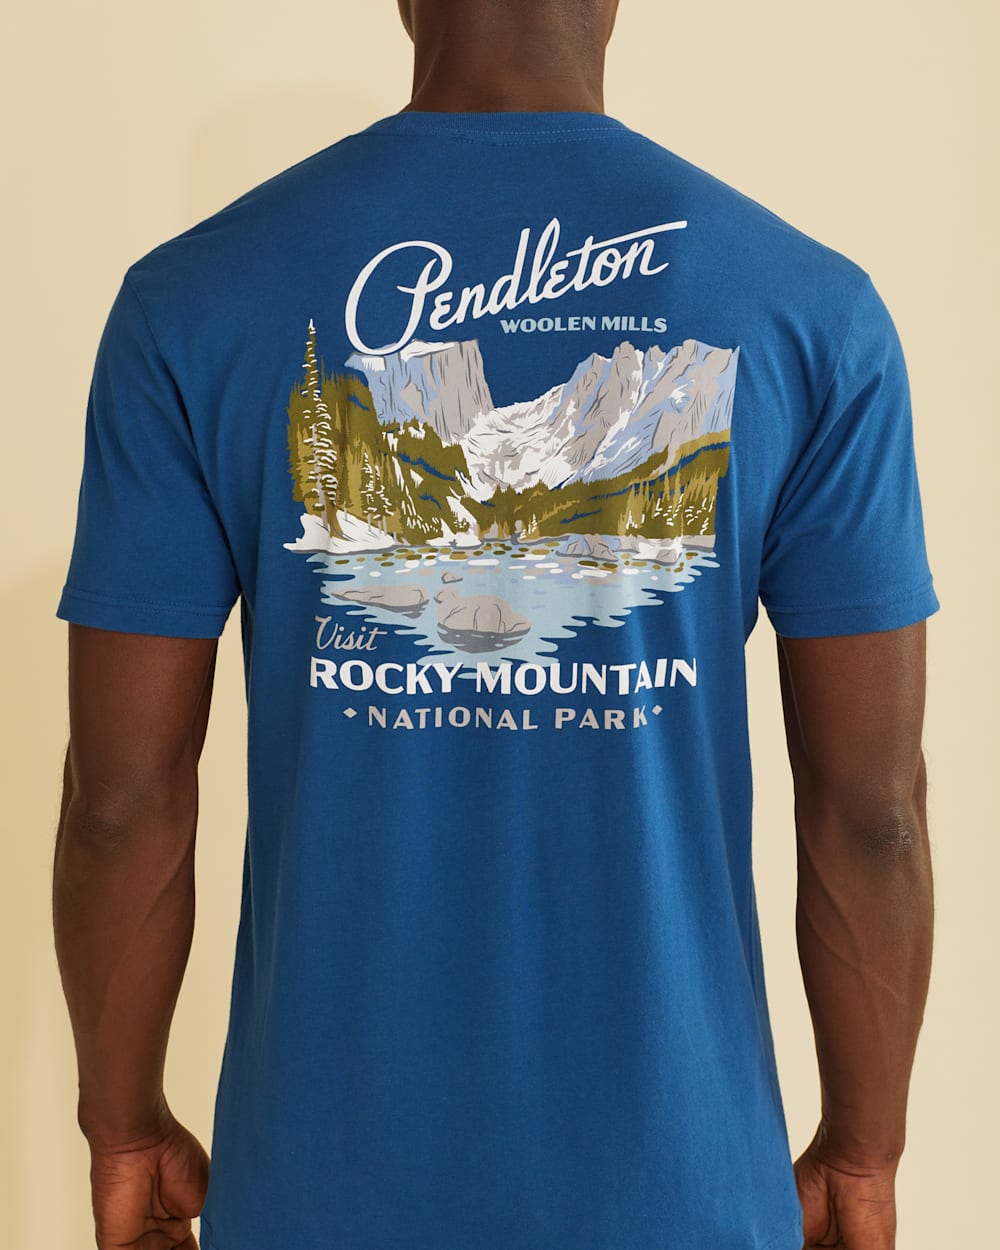 ALTERNATE VIEW OF MEN'S HERITAGE ROCKY MOUNTAIN TEE IN COOL BLUE/WHITE image number 2